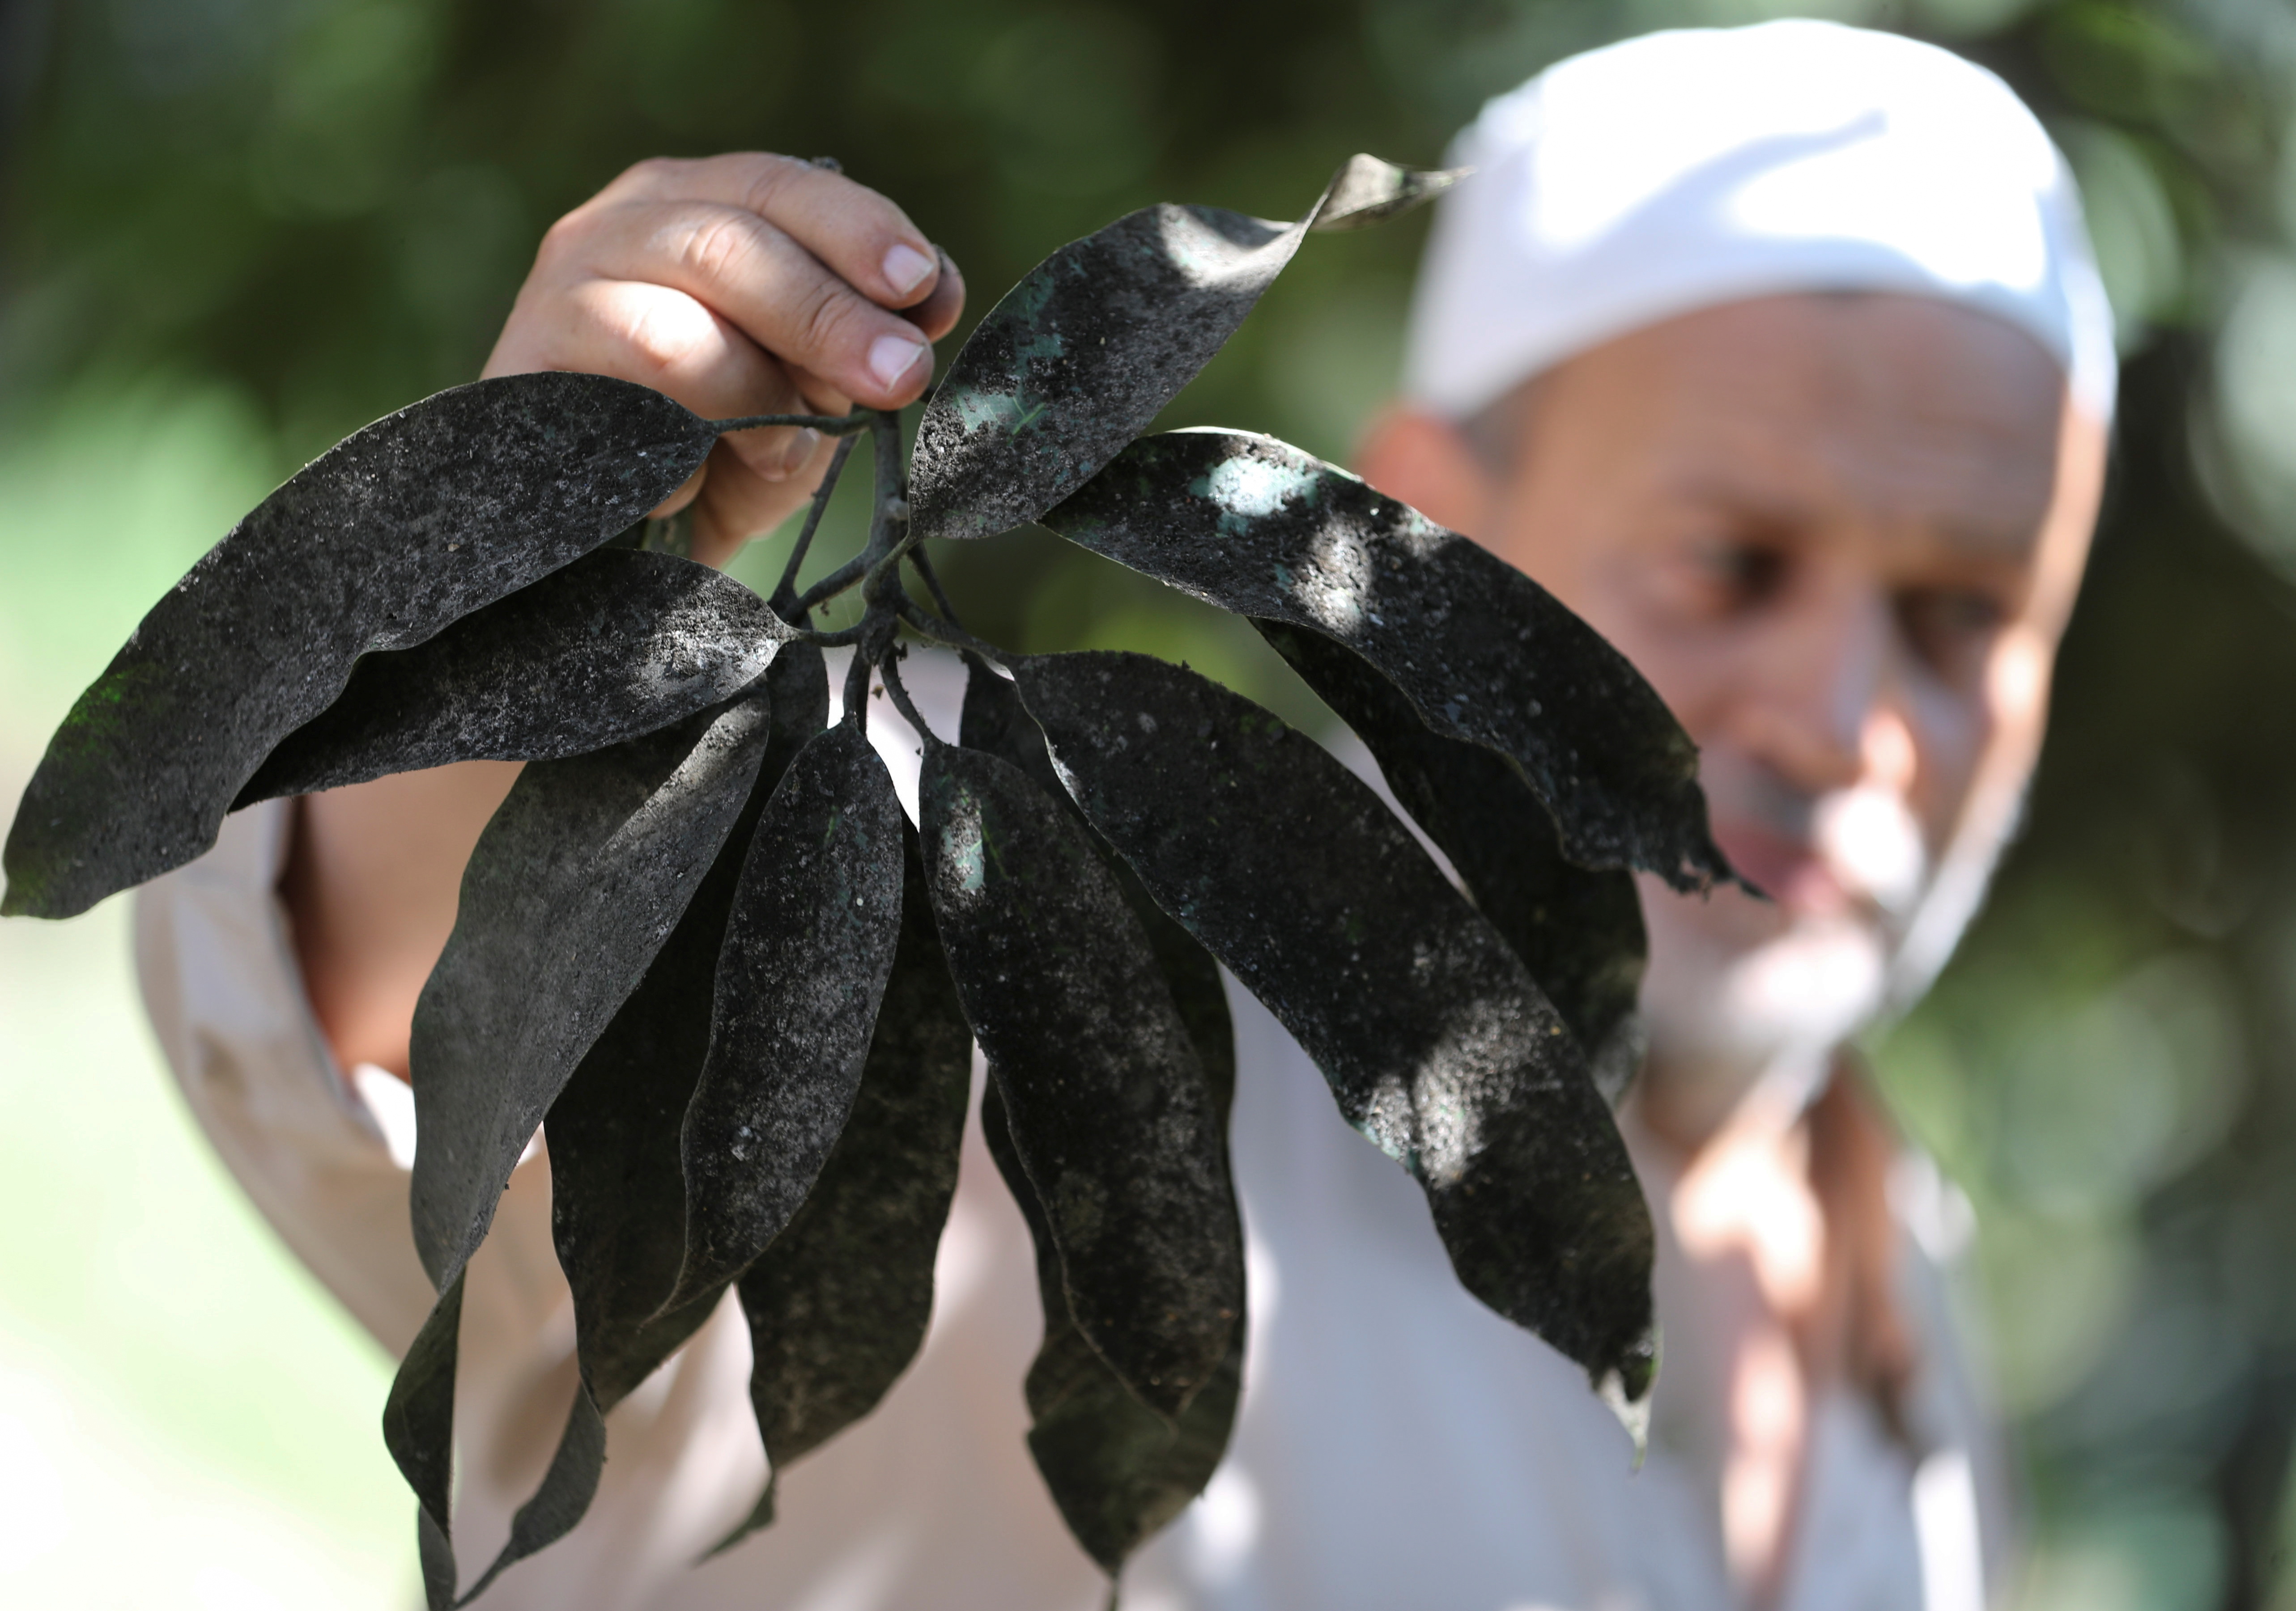 A farmer shows infected mango tree leaves after the yield dropped due to fungus linked to global warming, in Ismailia, Egypt, July 26, 2021. REUTERS/Mohamed Abd El Ghany